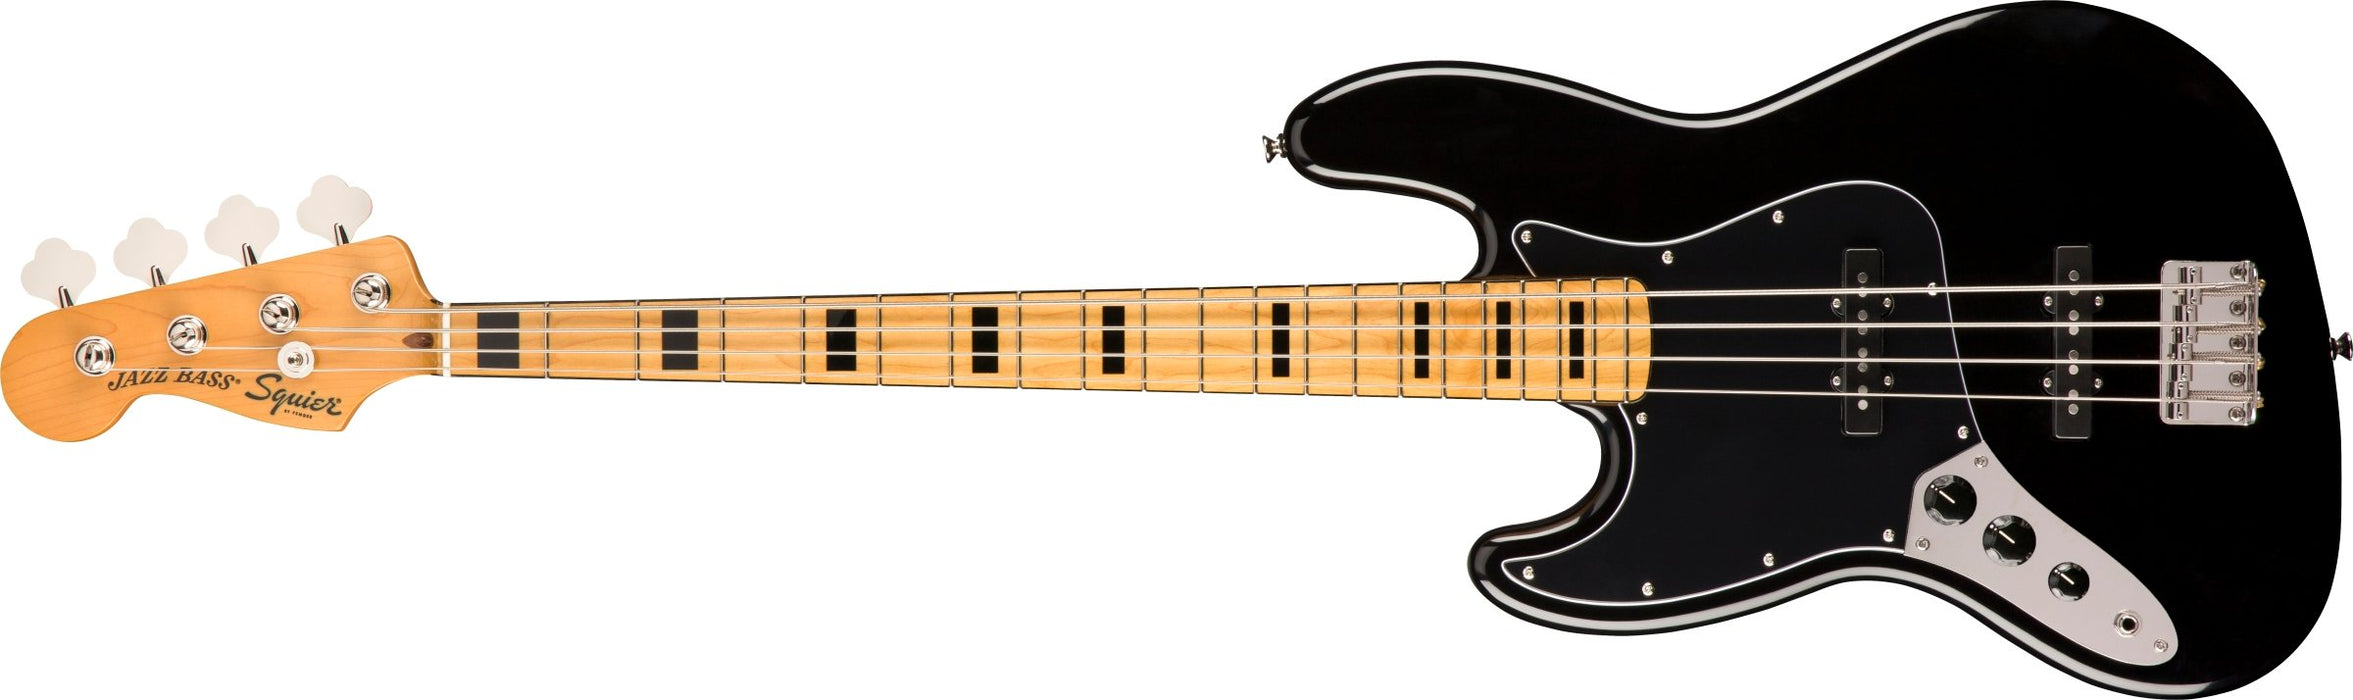 Squier Classic Vibe 70s Left Handed Jazz Bass - Black